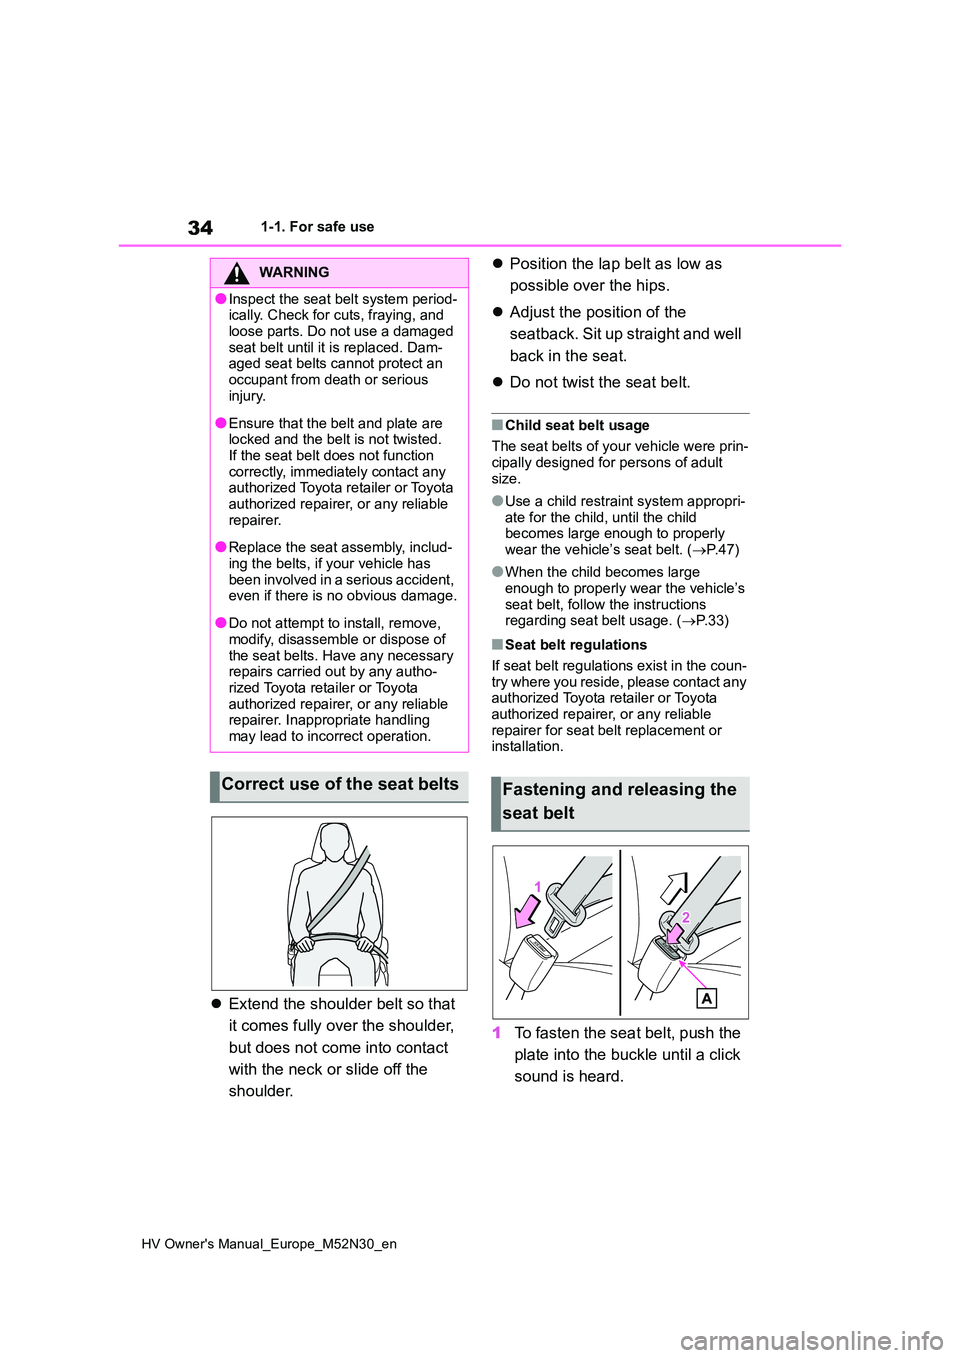 TOYOTA YARIS 2022  Owners Manual 34
HV Owner's Manual_Europe_M52N30_en
1-1. For safe use
Extend the shoulder belt so that  
it comes fully over the shoulder,  
but does not come into contact  
with the neck or slide off the  
